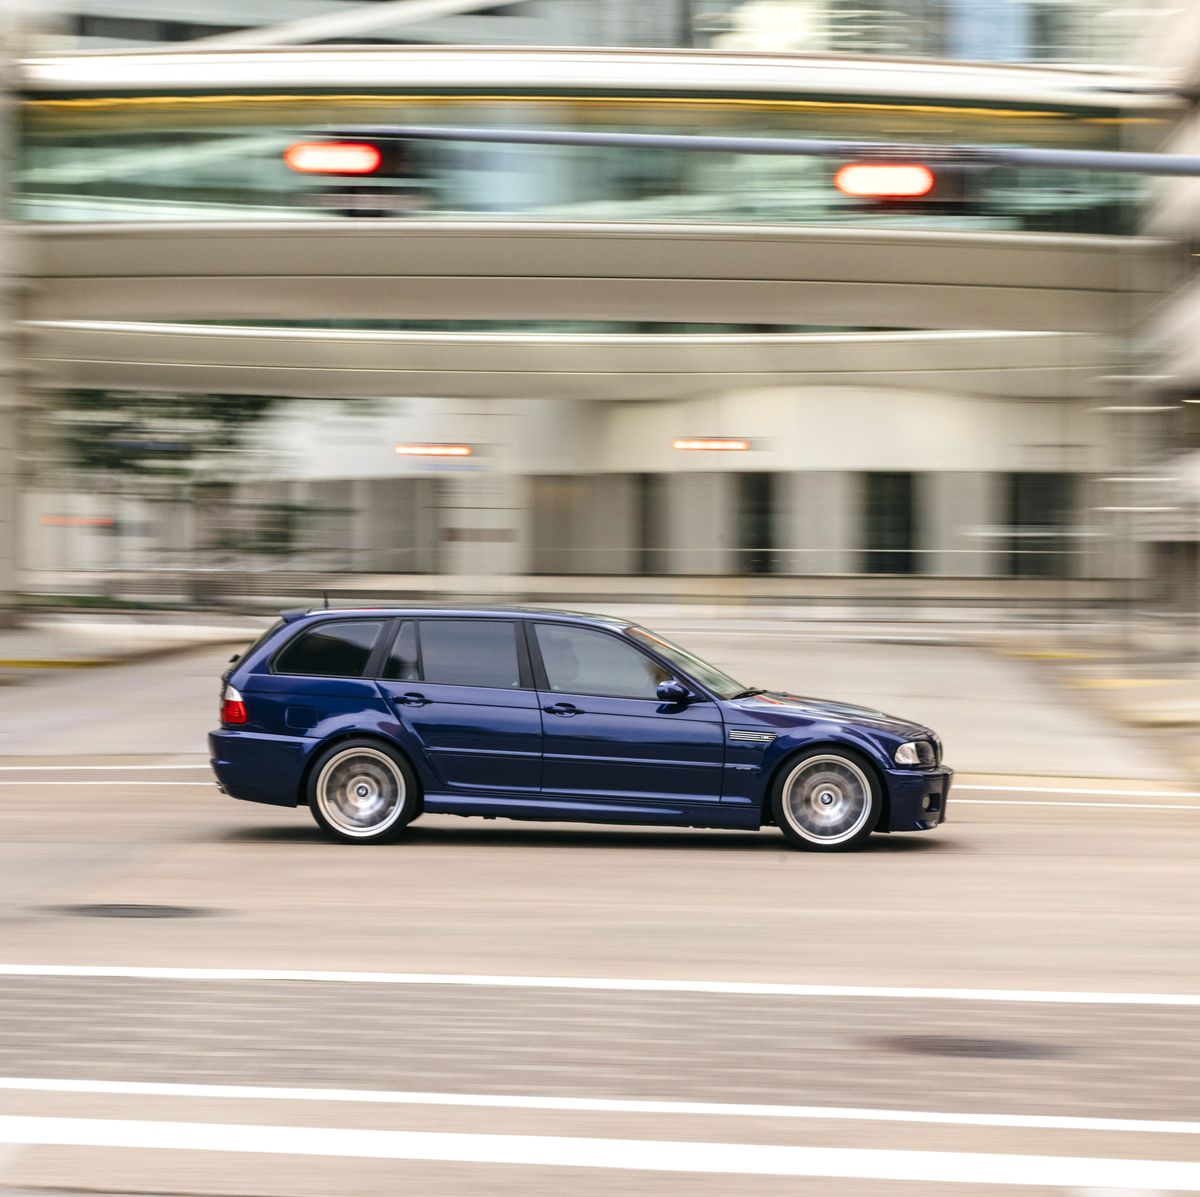 Forbidden Fruit: Creating the E46 M3 Wagon BMW Should've Produced